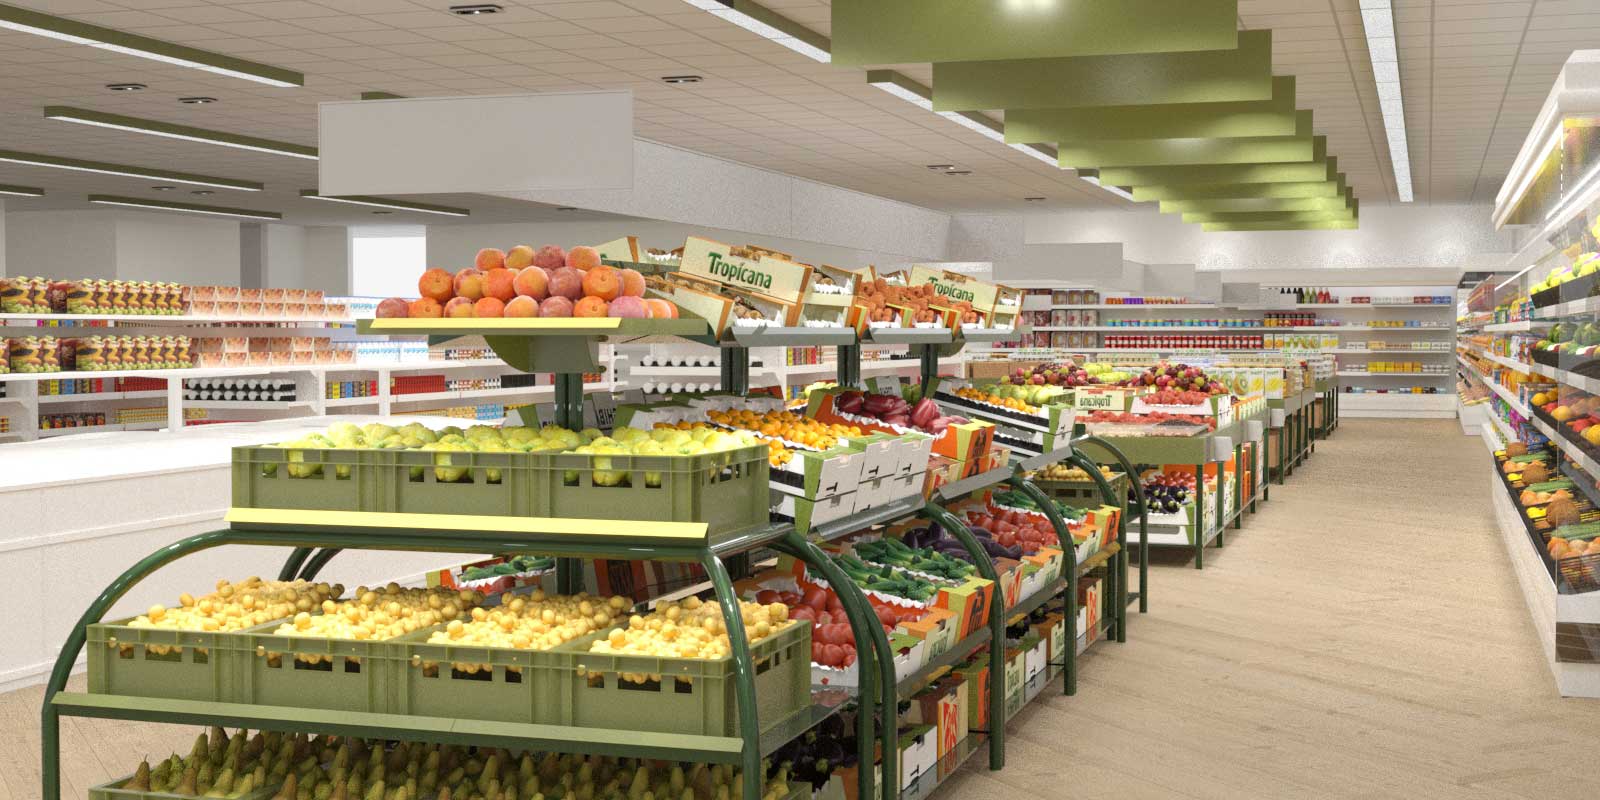 A new supermarket market fresh produce interior design concept for Magnit in Moscow Russia